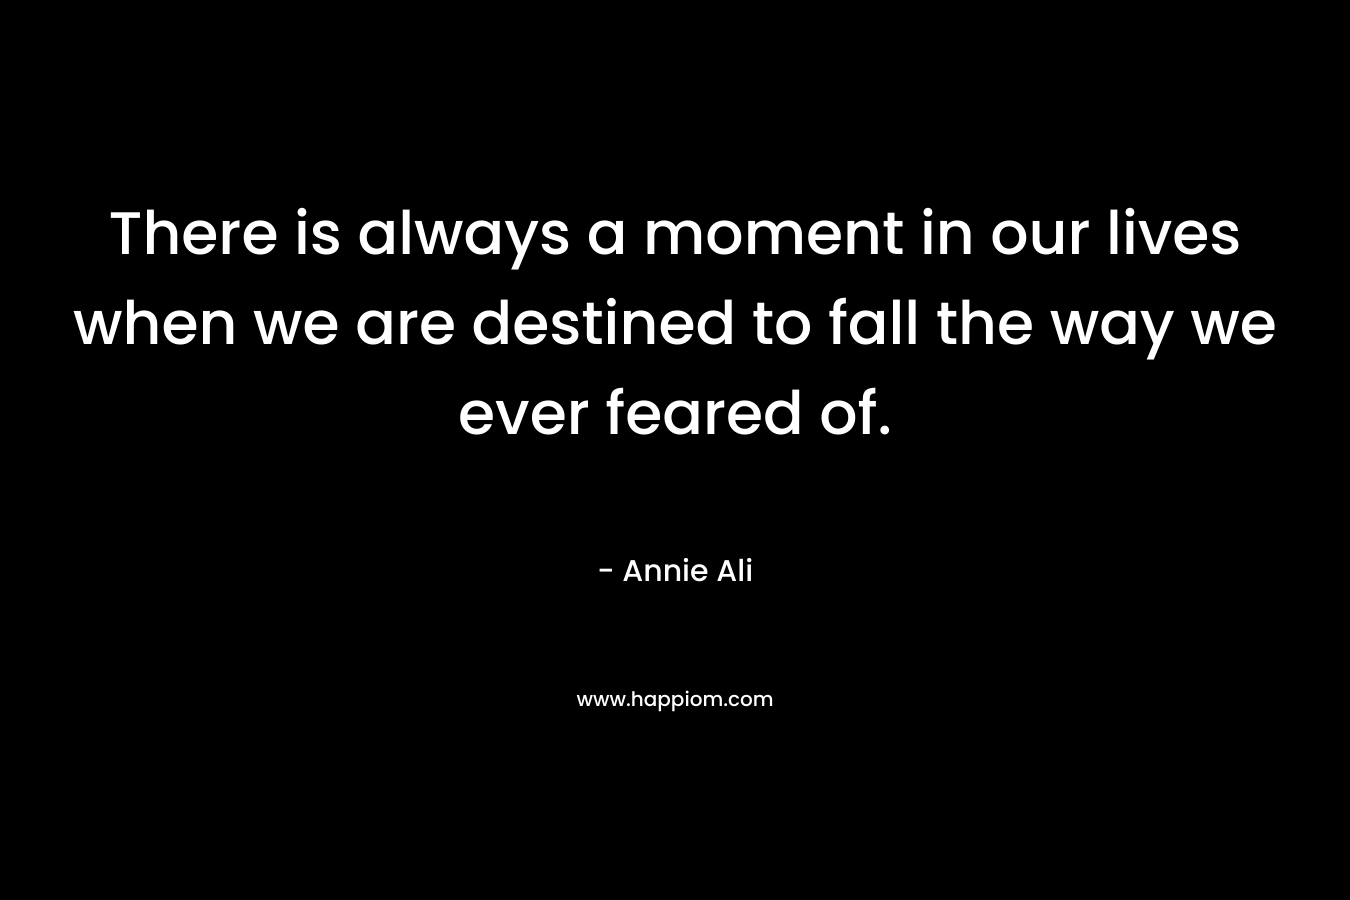 There is always a moment in our lives when we are destined to fall the way we ever feared of. – Annie Ali